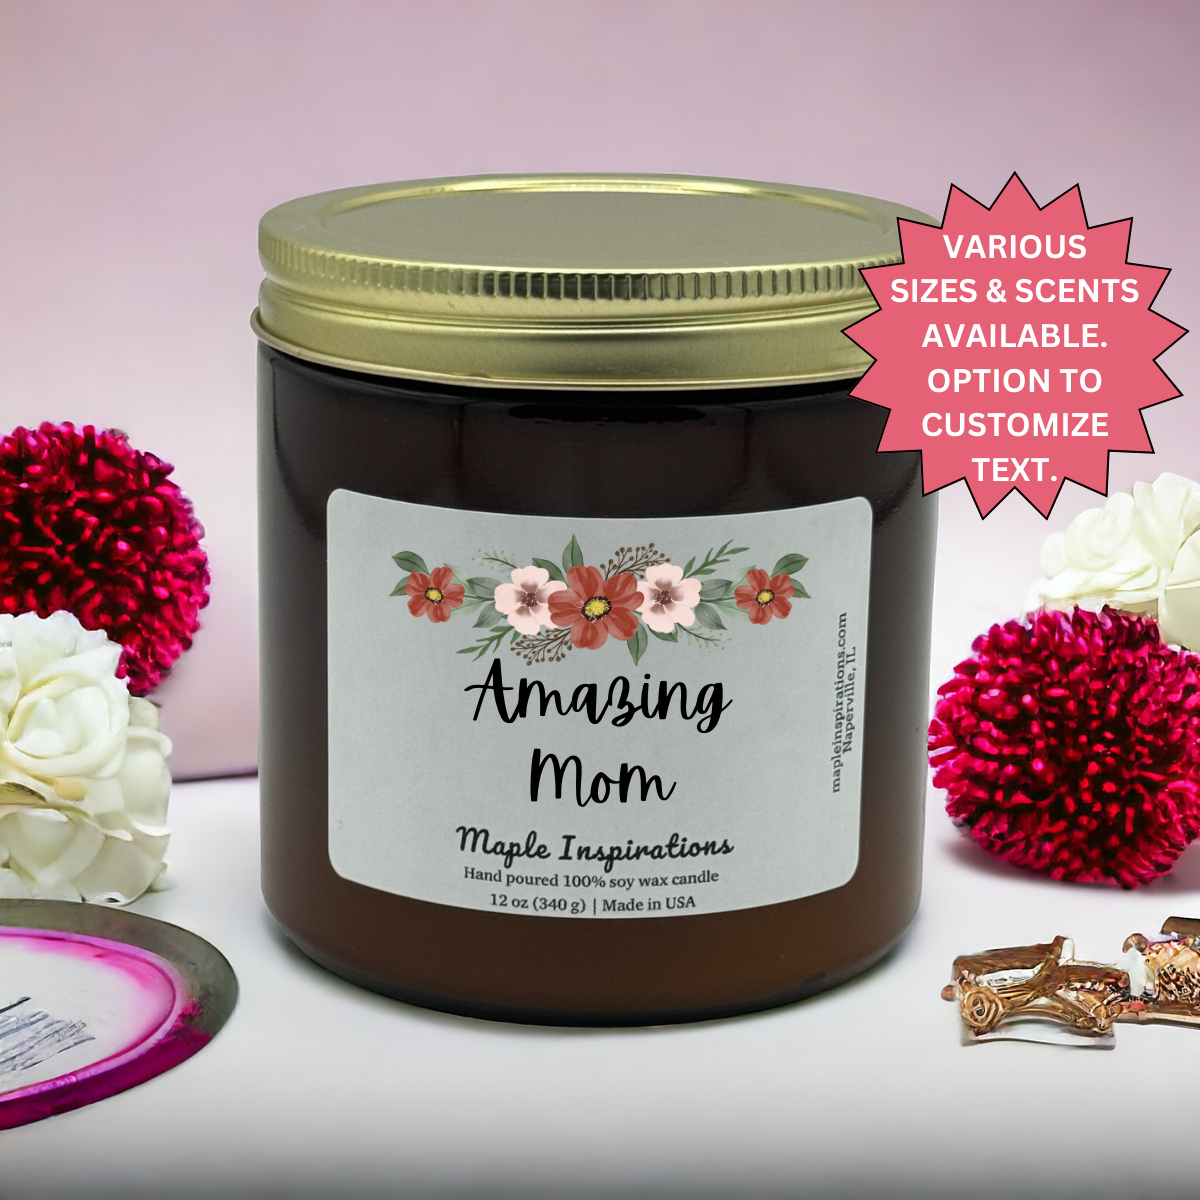 Amazing Mom Candle For Mom, Mother's Day Gift, Gift For Mom, Mothers Day Candle, Mom Birthday Gift